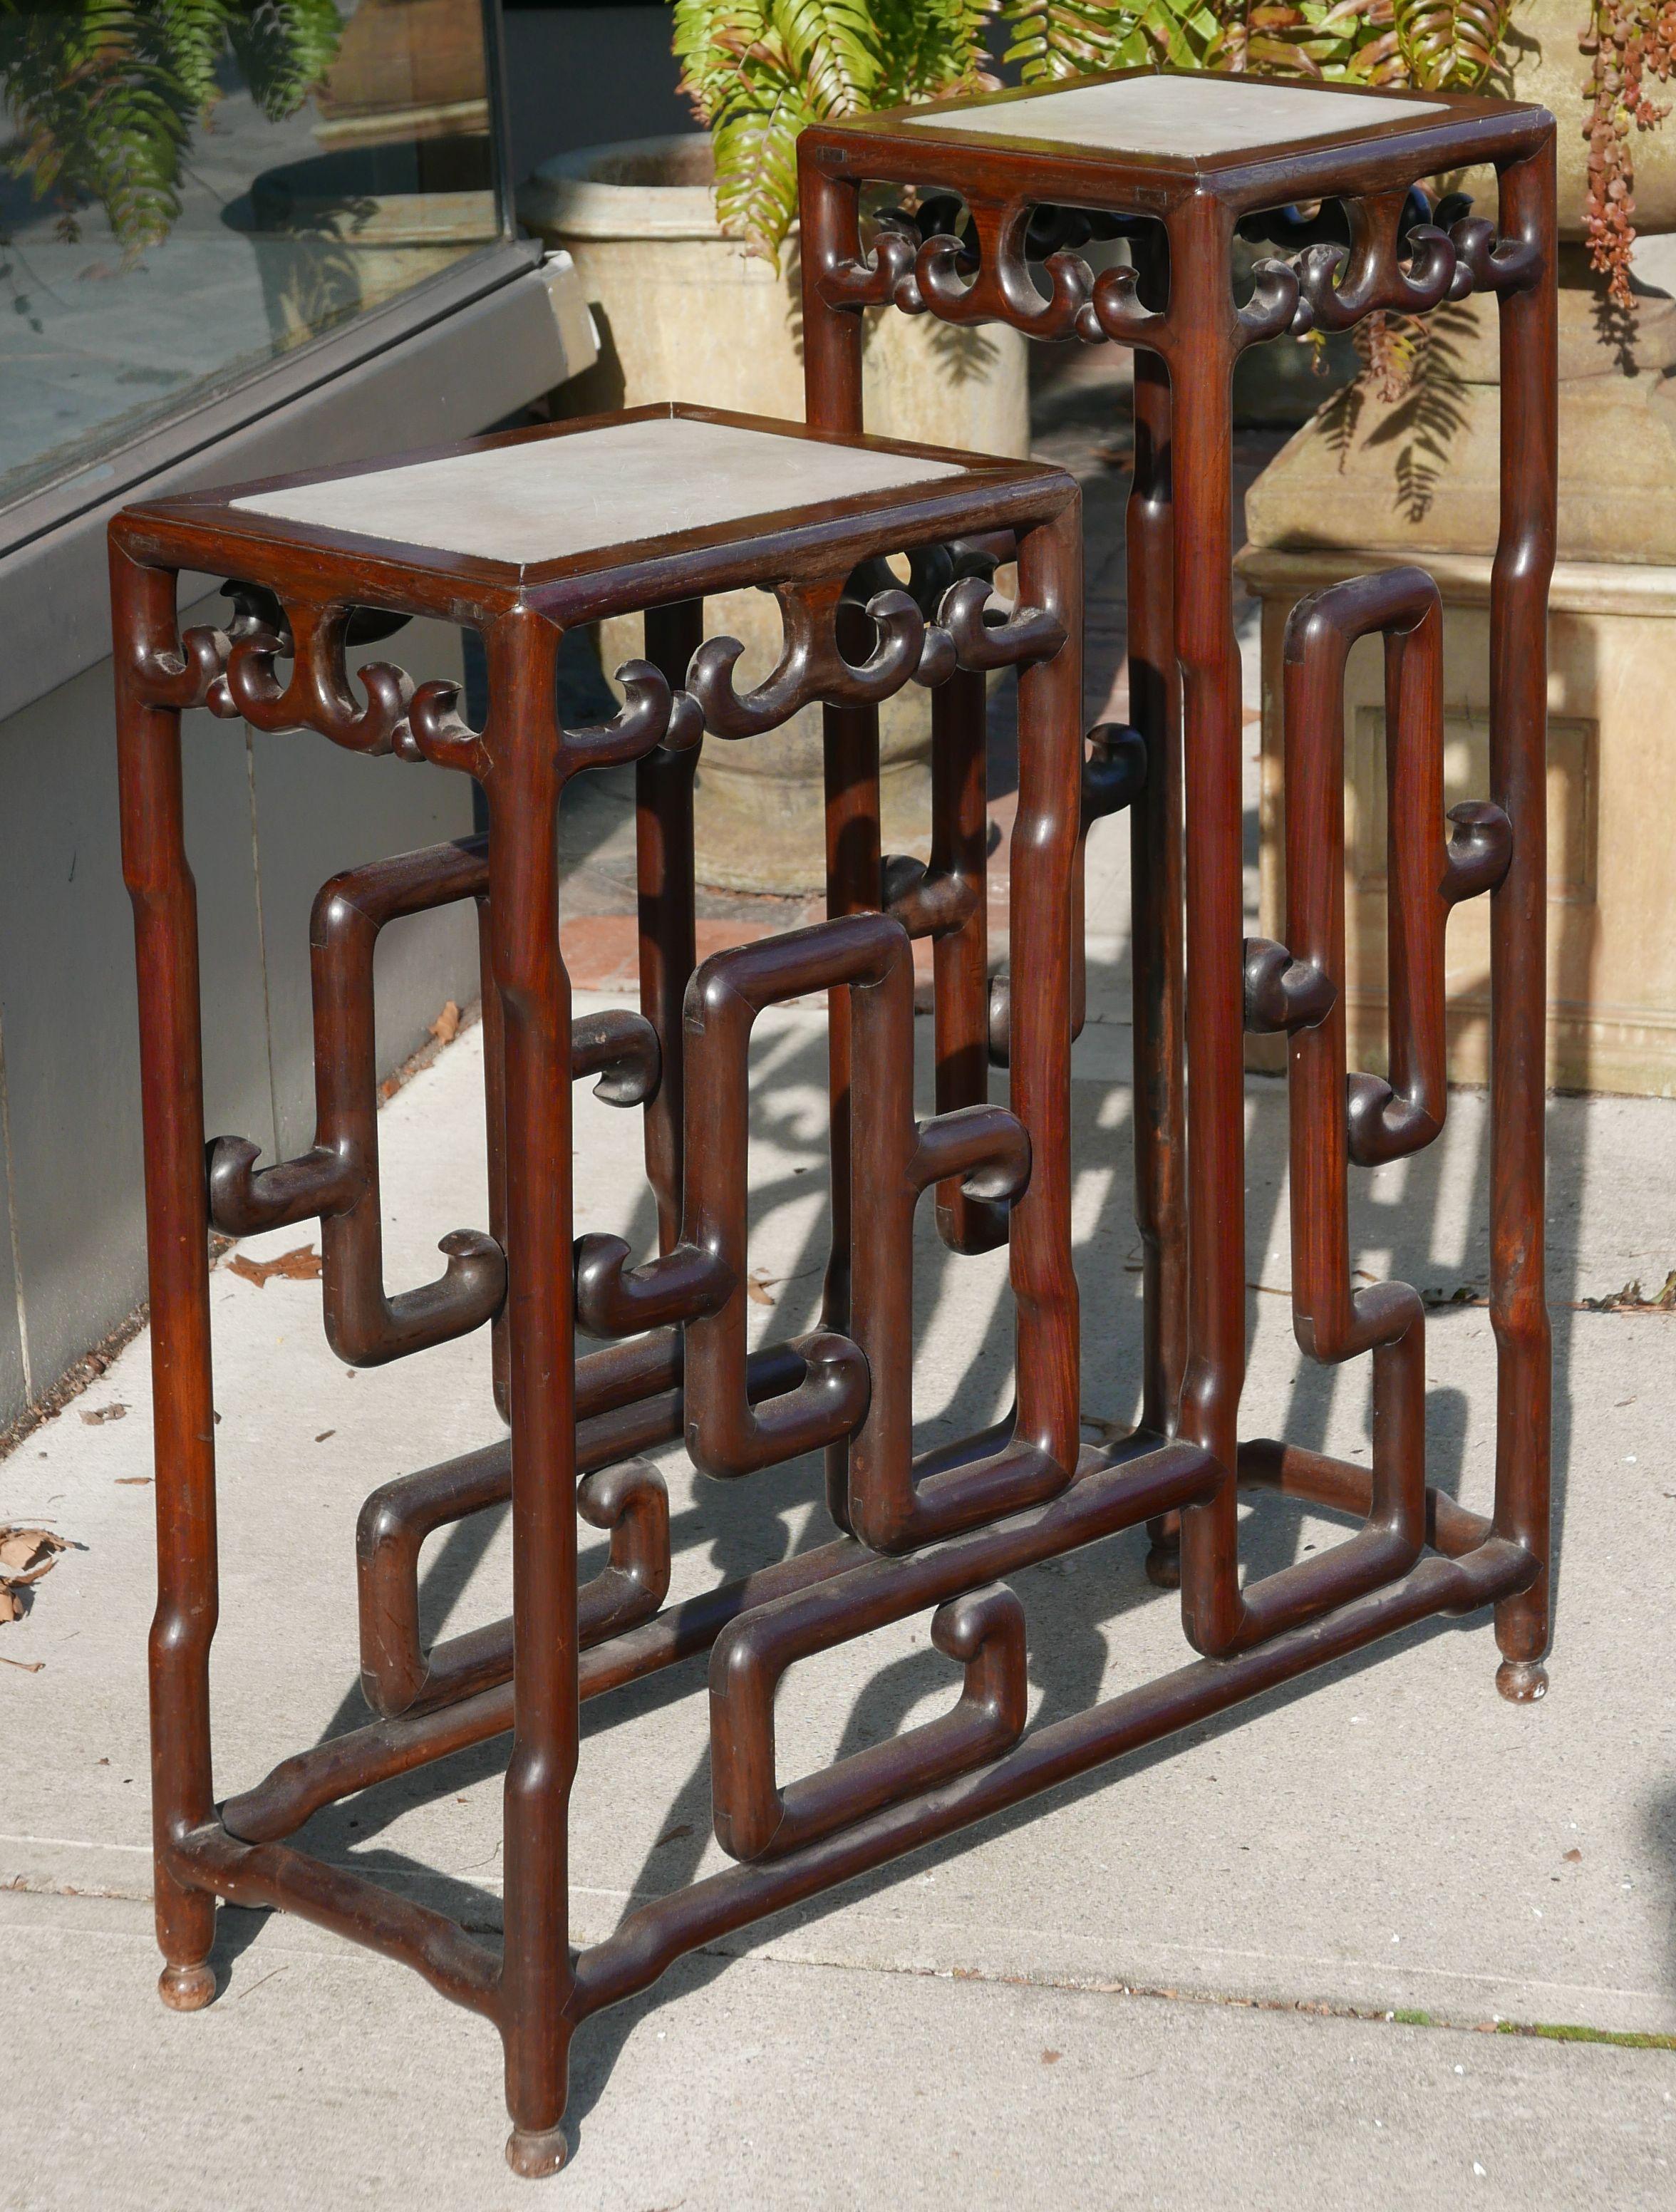 Sculptural rosewood Chinese republic era double pedestal or plant stand with marble tops. Featuring rosewood base with mortise and tenon construction. It's pretty amazing the actual construction of the piece. taller pedestal measures 12